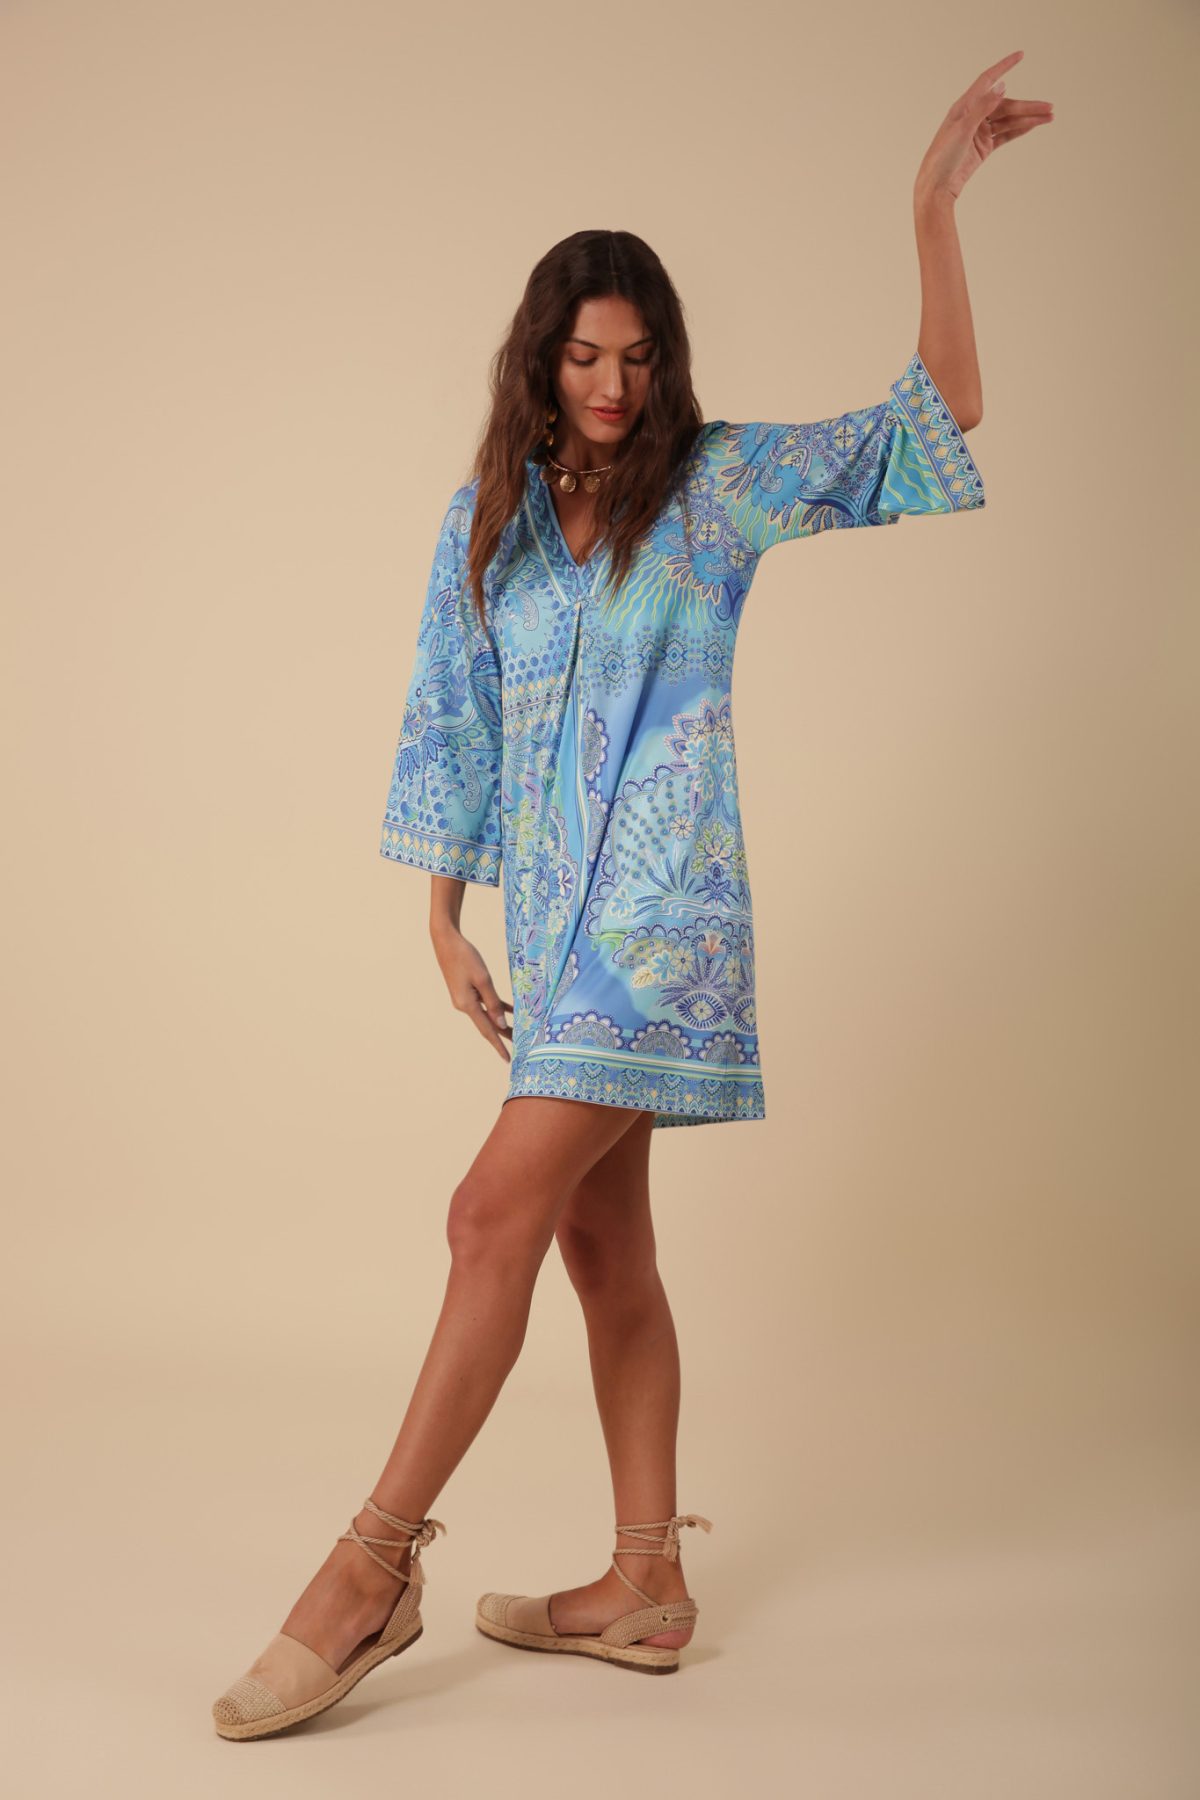 Hale Bob 3ZFL630B Blue Long Sleeve Beaded V Neckline Dress | Ooh Ooh Shoes women's clothing and shoe boutique located in Naples